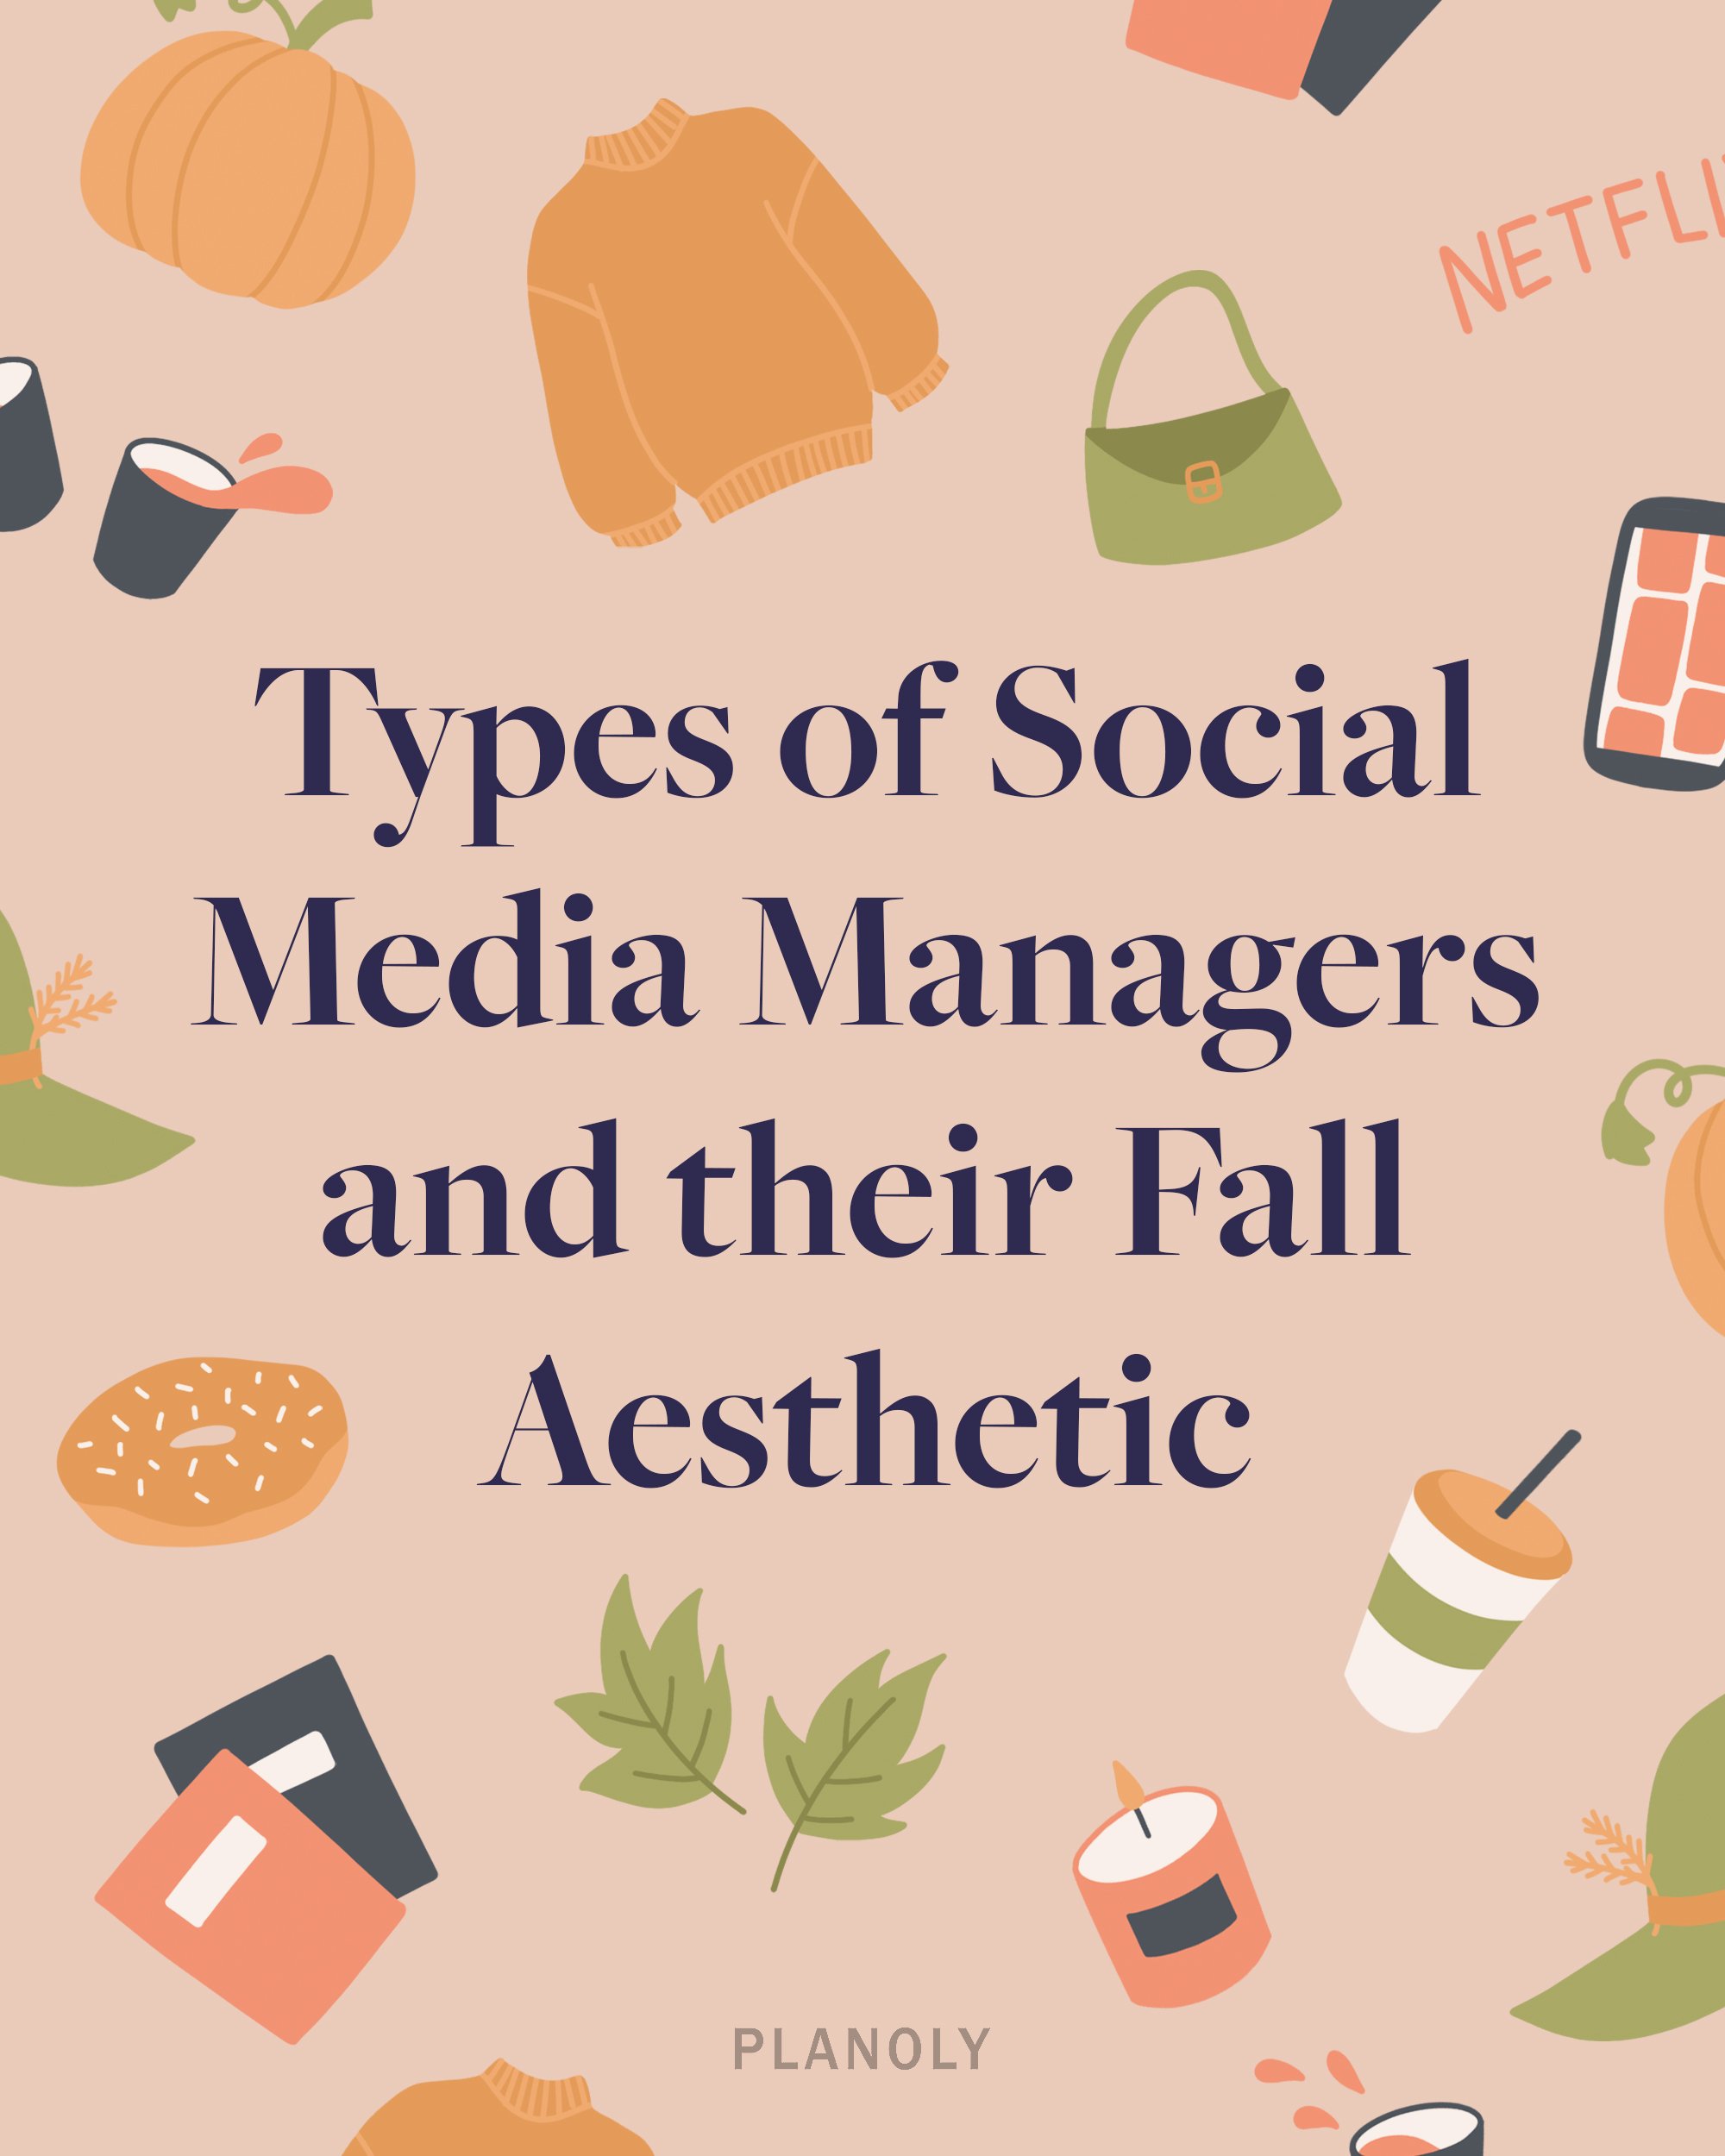 Meme Relatable_SMM Types_Types of SMMs and Their Fall Aesthetic_IG Grid_Sept 22_01.jpg